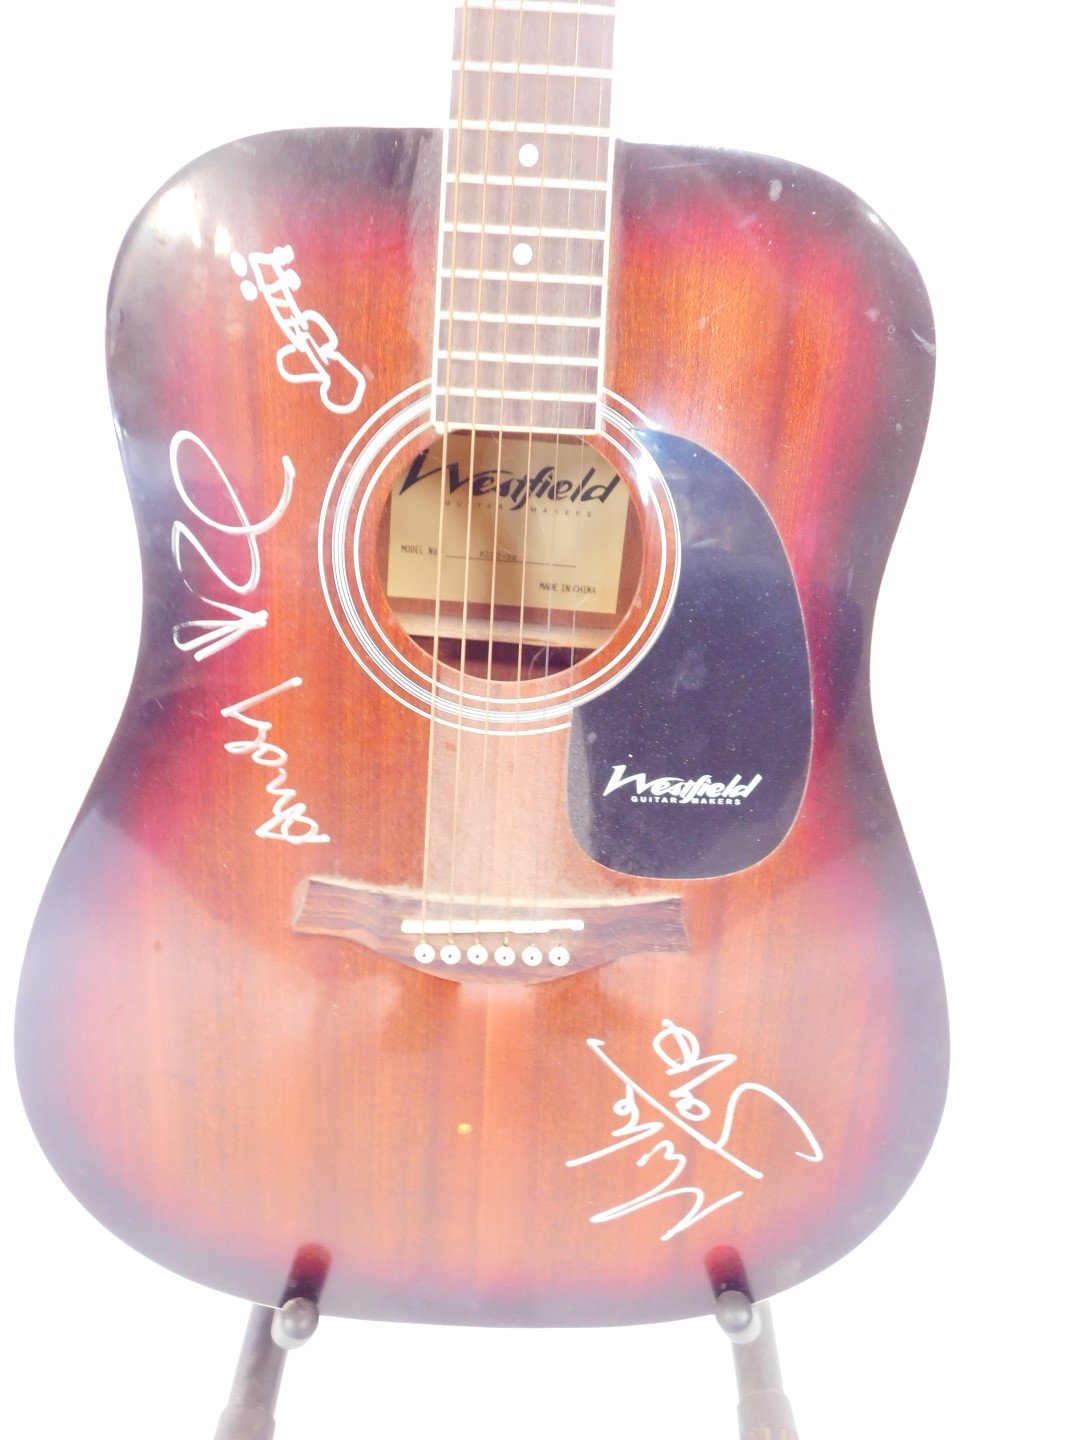 A Westfield guitar, model B200-SB, on guitar stand, with silver marker signatures relating to The Sm - Image 3 of 3